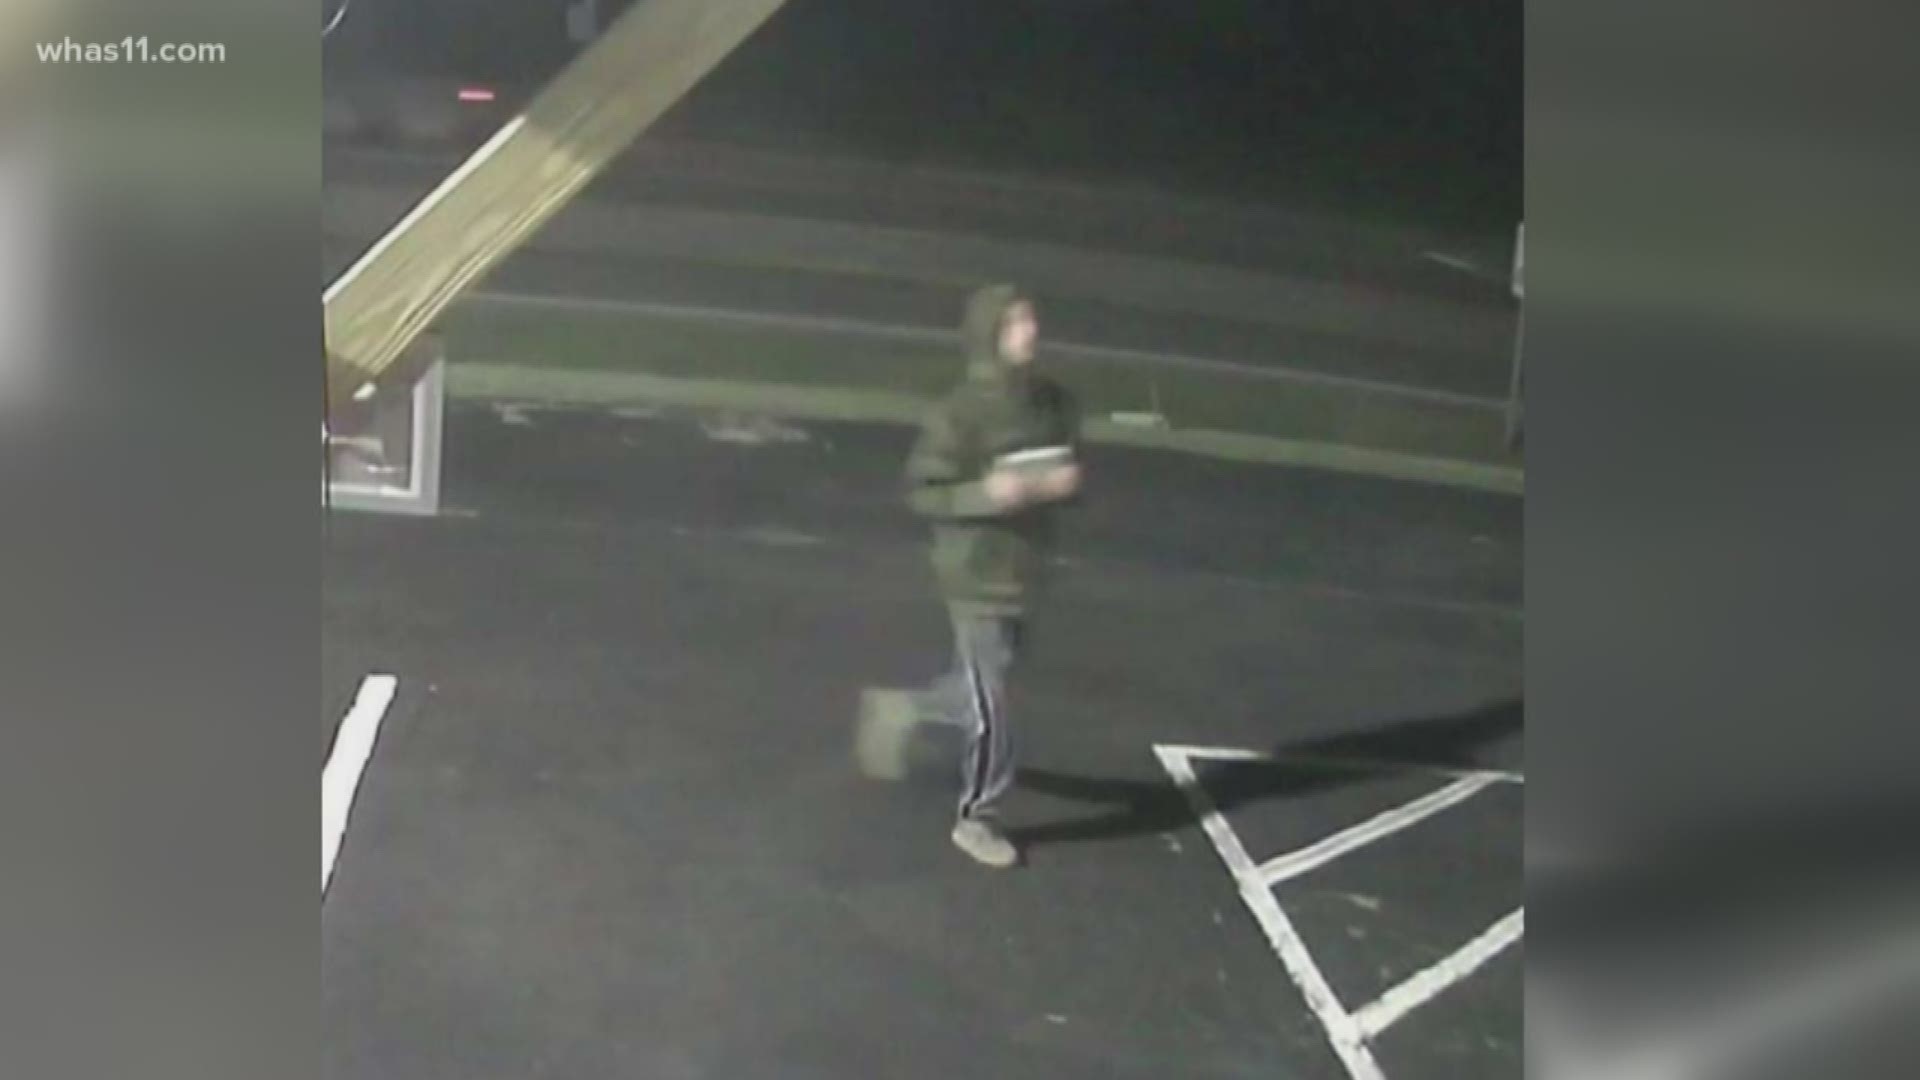 Kentucky authorities are searching for a man they say is responsible for vandalism at various businesses in Henry County.